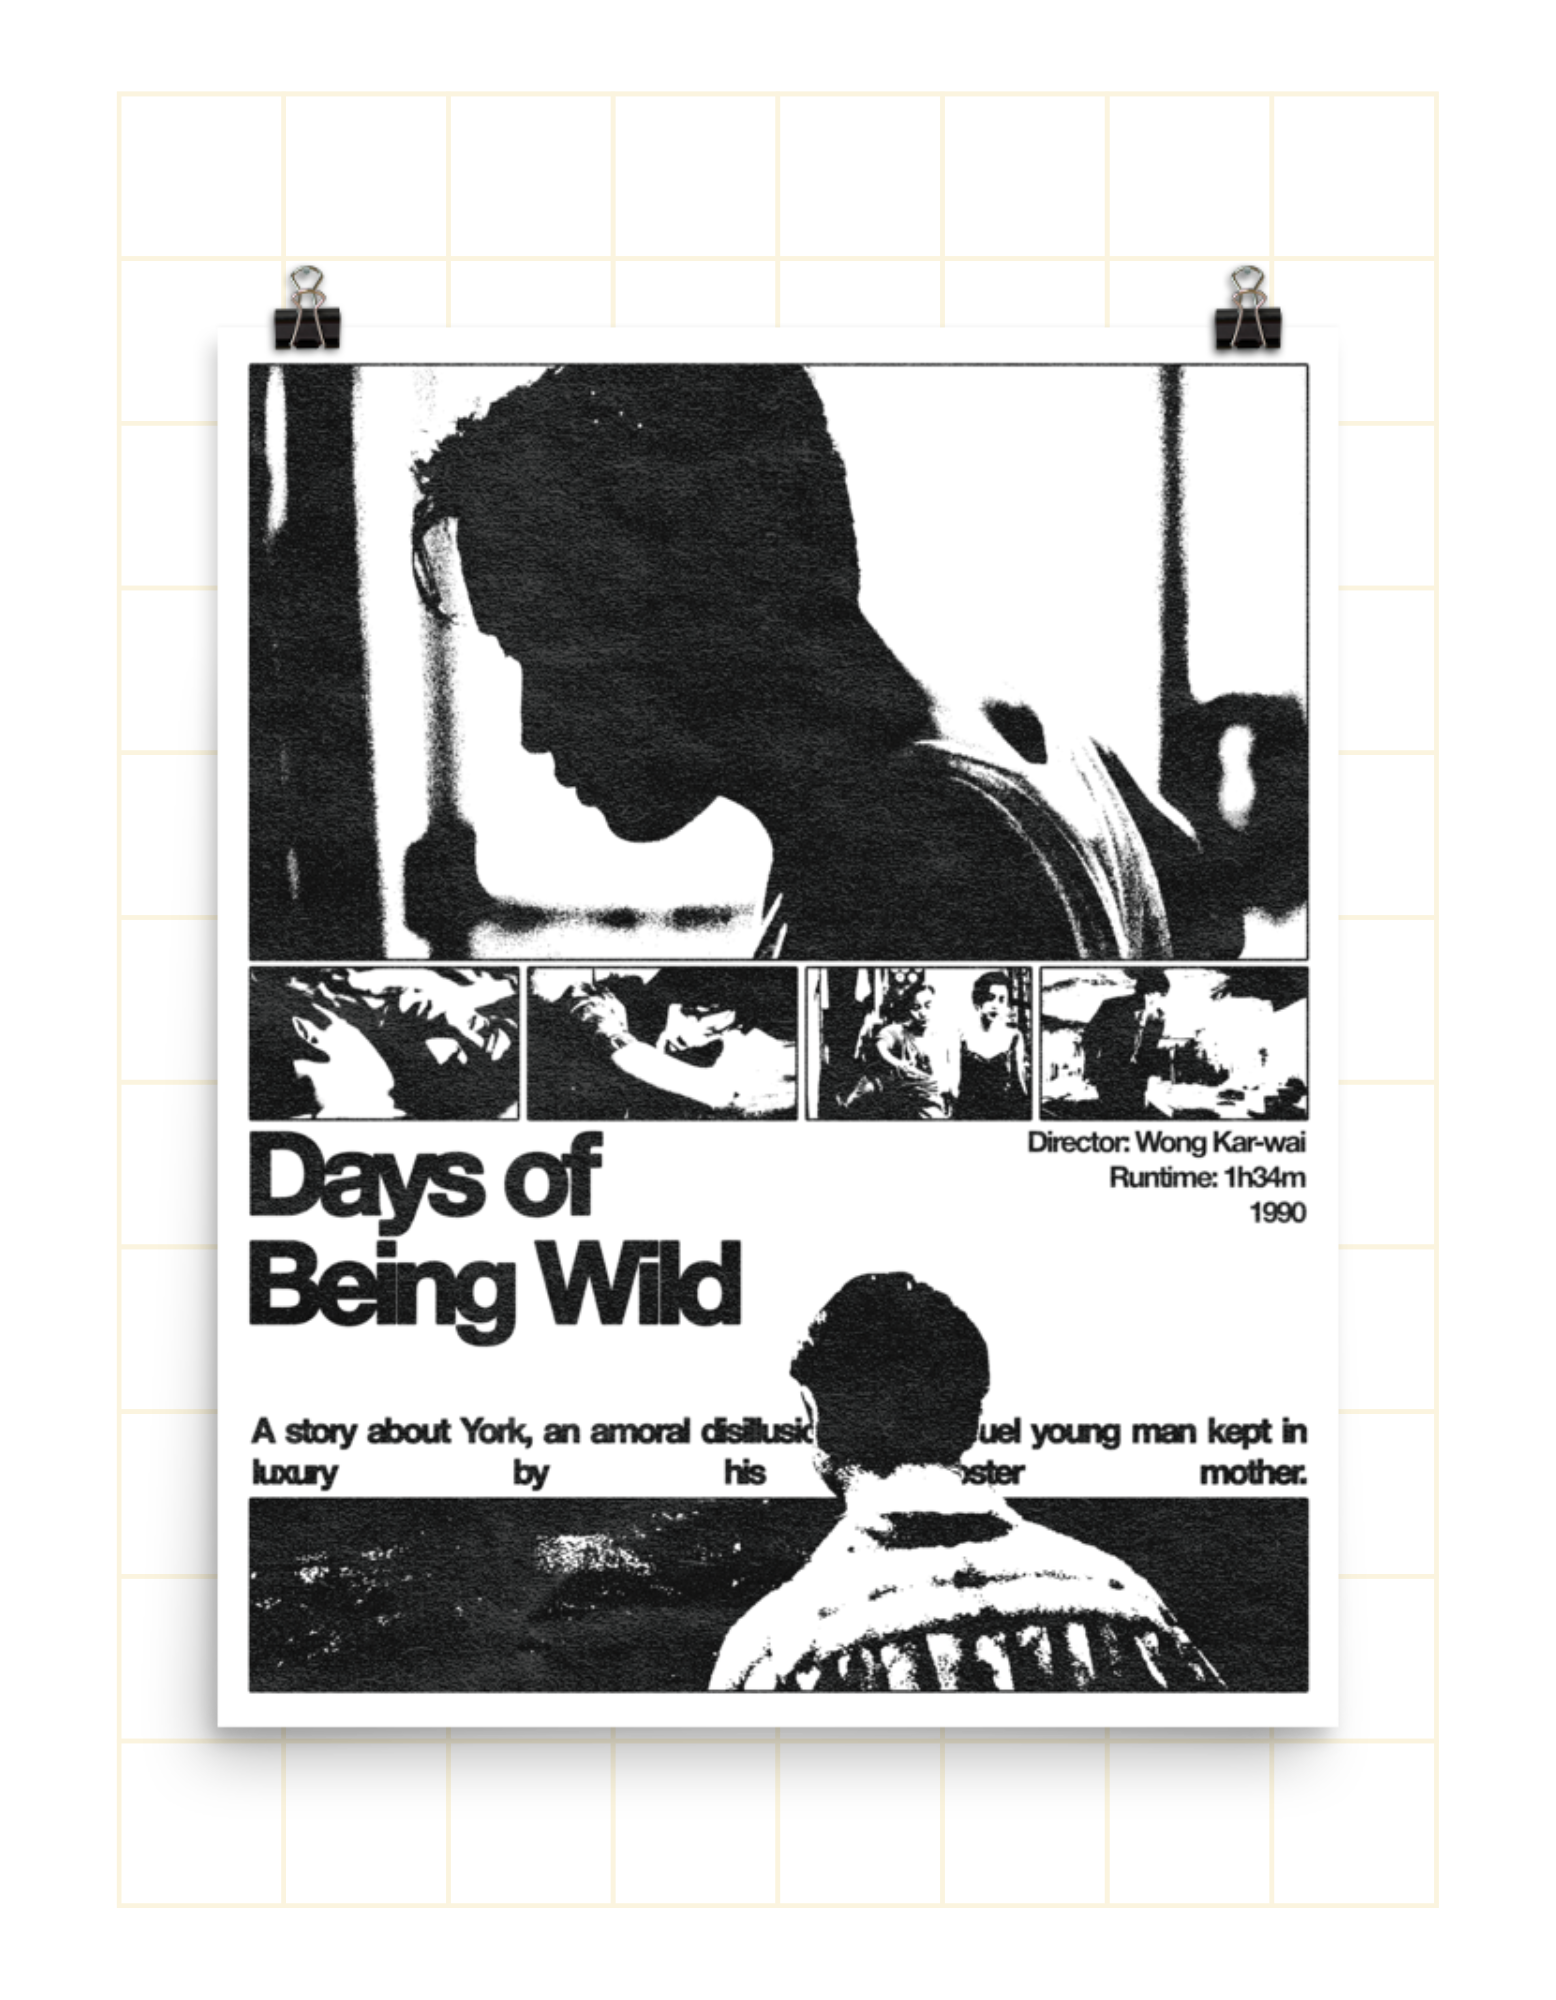 DAYS OF BEING WILD POSTER